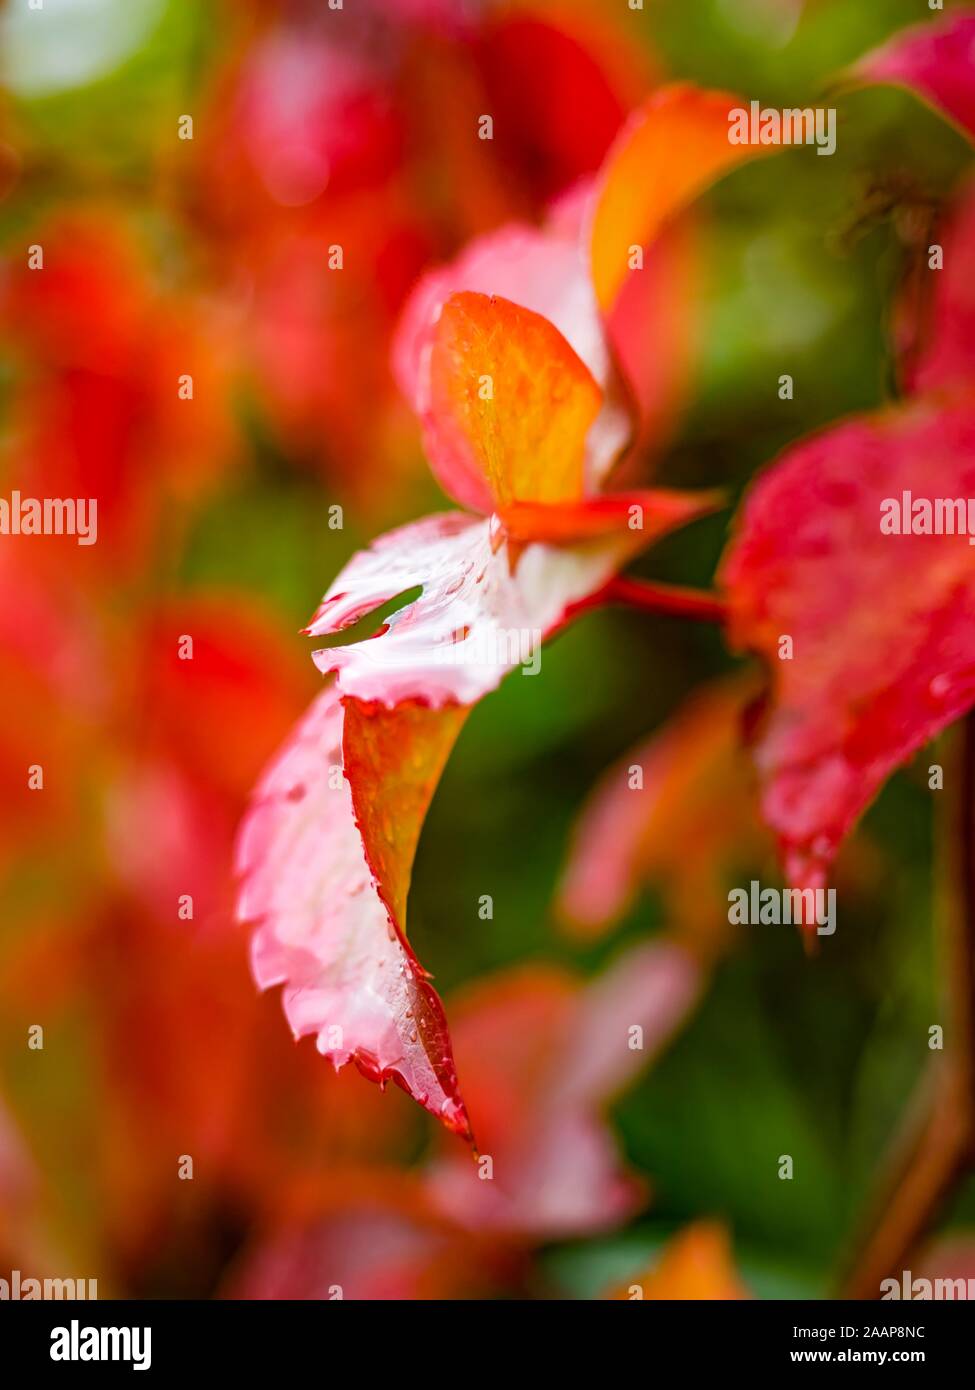 Red leaves after rain one leaf isolated Stock Photo